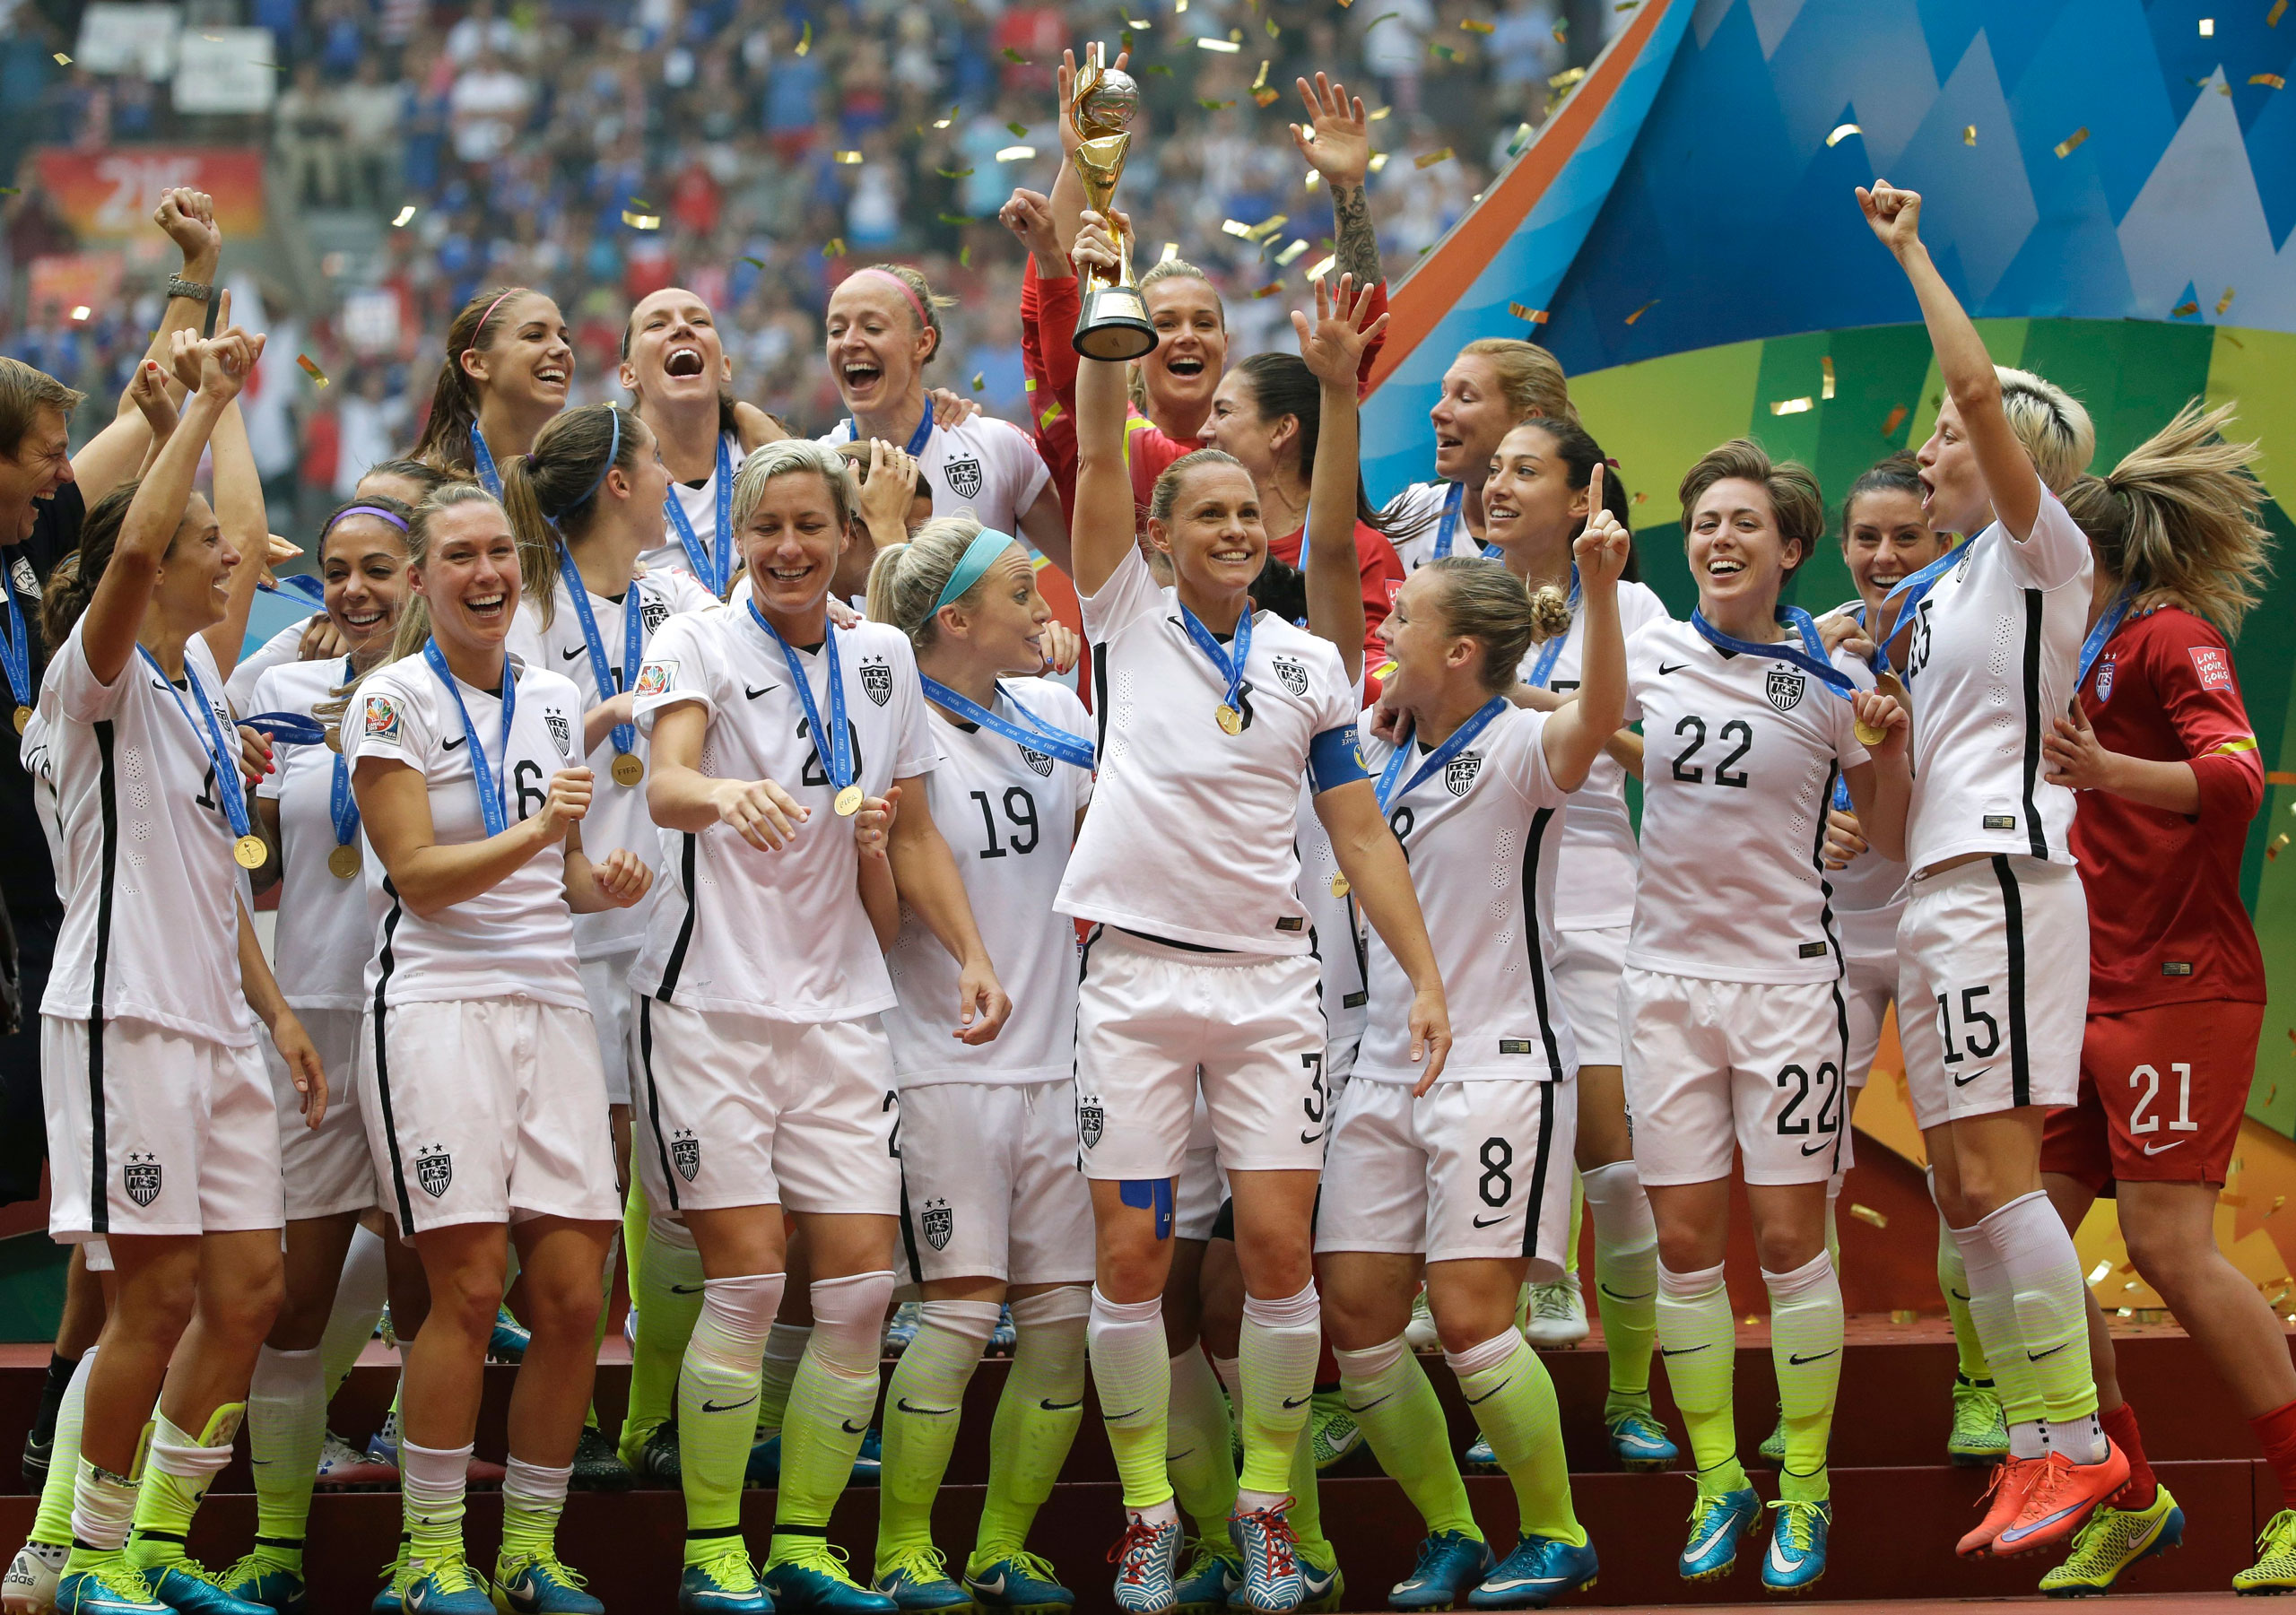 The U.S.A. Women's National Team celebrates with the trophy after they beat Japan 5-2 in the final match of the 2015 FIFA Women's World Cup at the BC Place Stadium in Vancouver on July 5, 2015. (Elaine Thompson&mdash;AP)